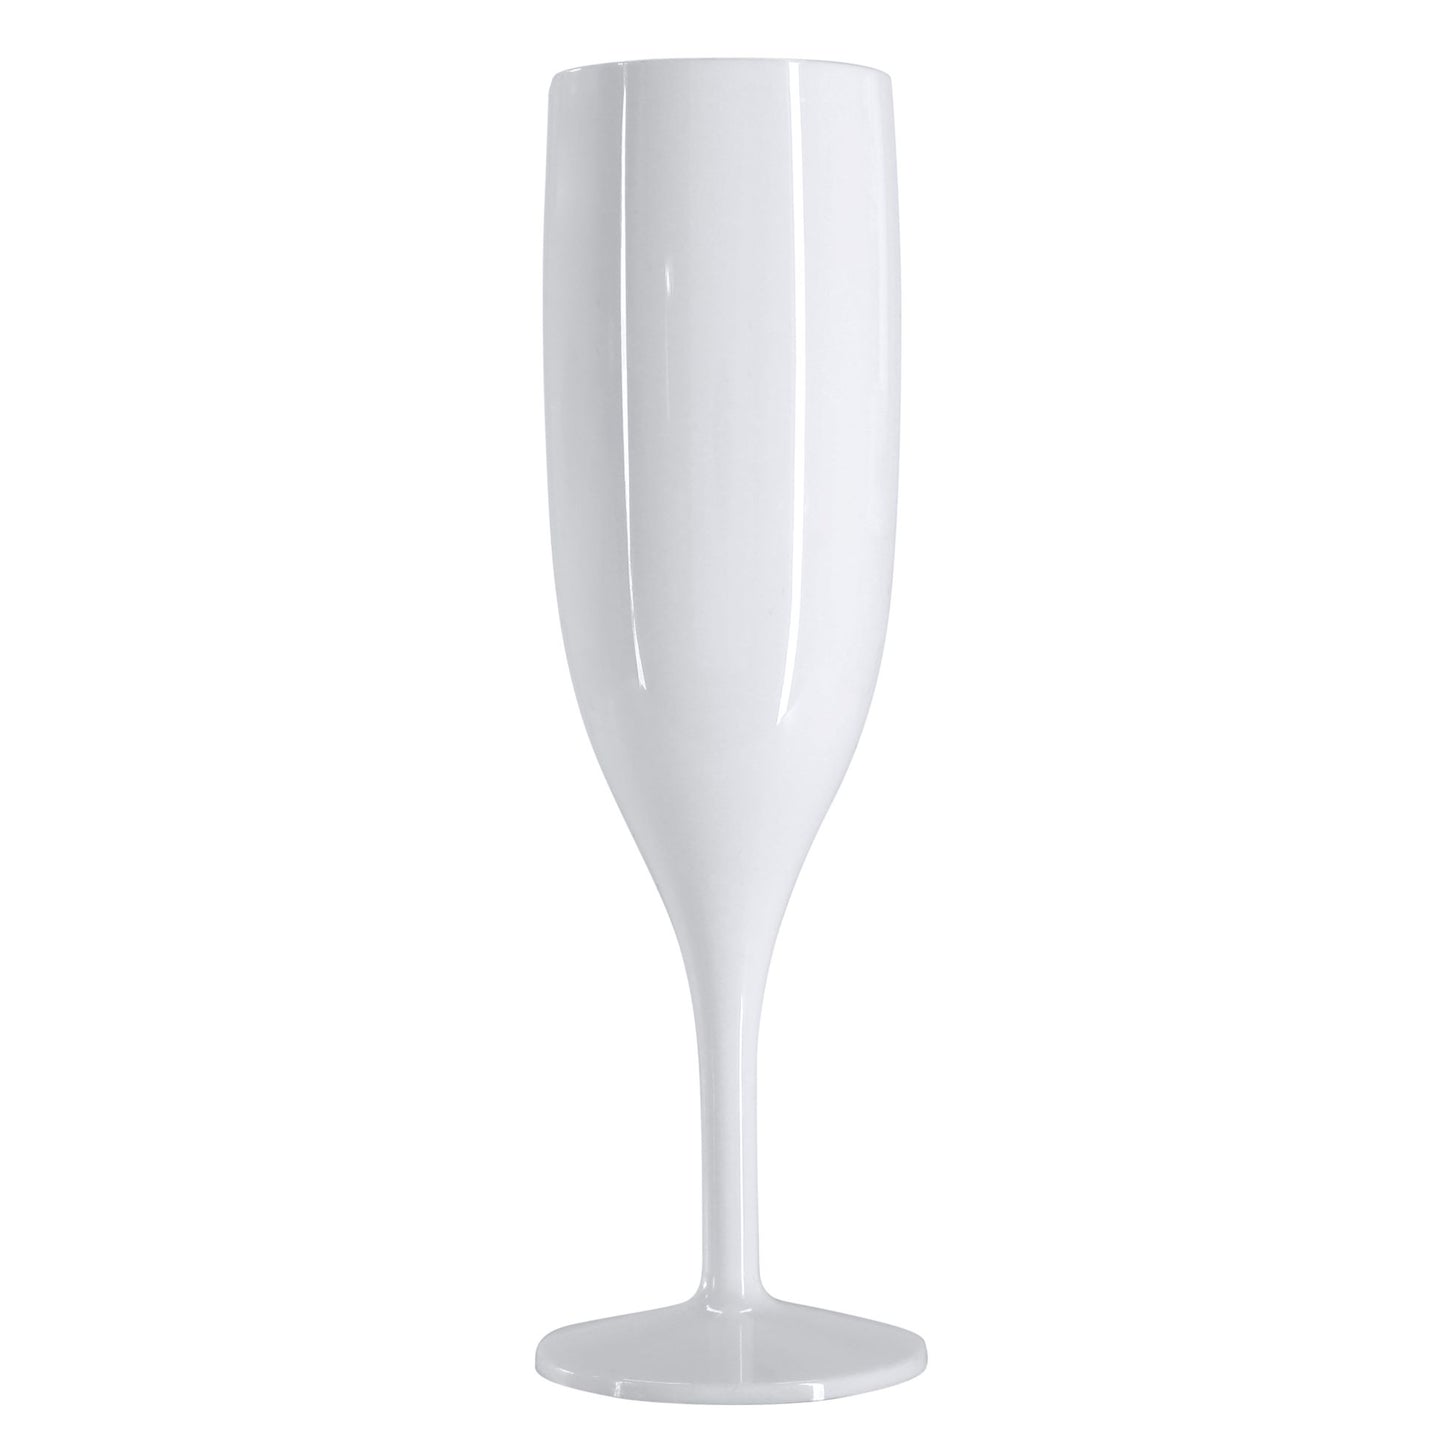 6 x White Prosecco Flutes – Made from Strong Reusable Plastic in glossy Bright White Colour 1-Piece Champagne Glass (Pack of 6 Glasses) for use Indoors and Outdoors, Wedding, Parties, Bridal Shower-5056020186205-EY-PP-076-Product Pro-Baby Shower, Bridal Shower, Hen Do, Reusable Flutes, White Champagne Flutes, White Champagne Glasses, White Flutes, White Prosecco Flutes, White Prosecco Glasses